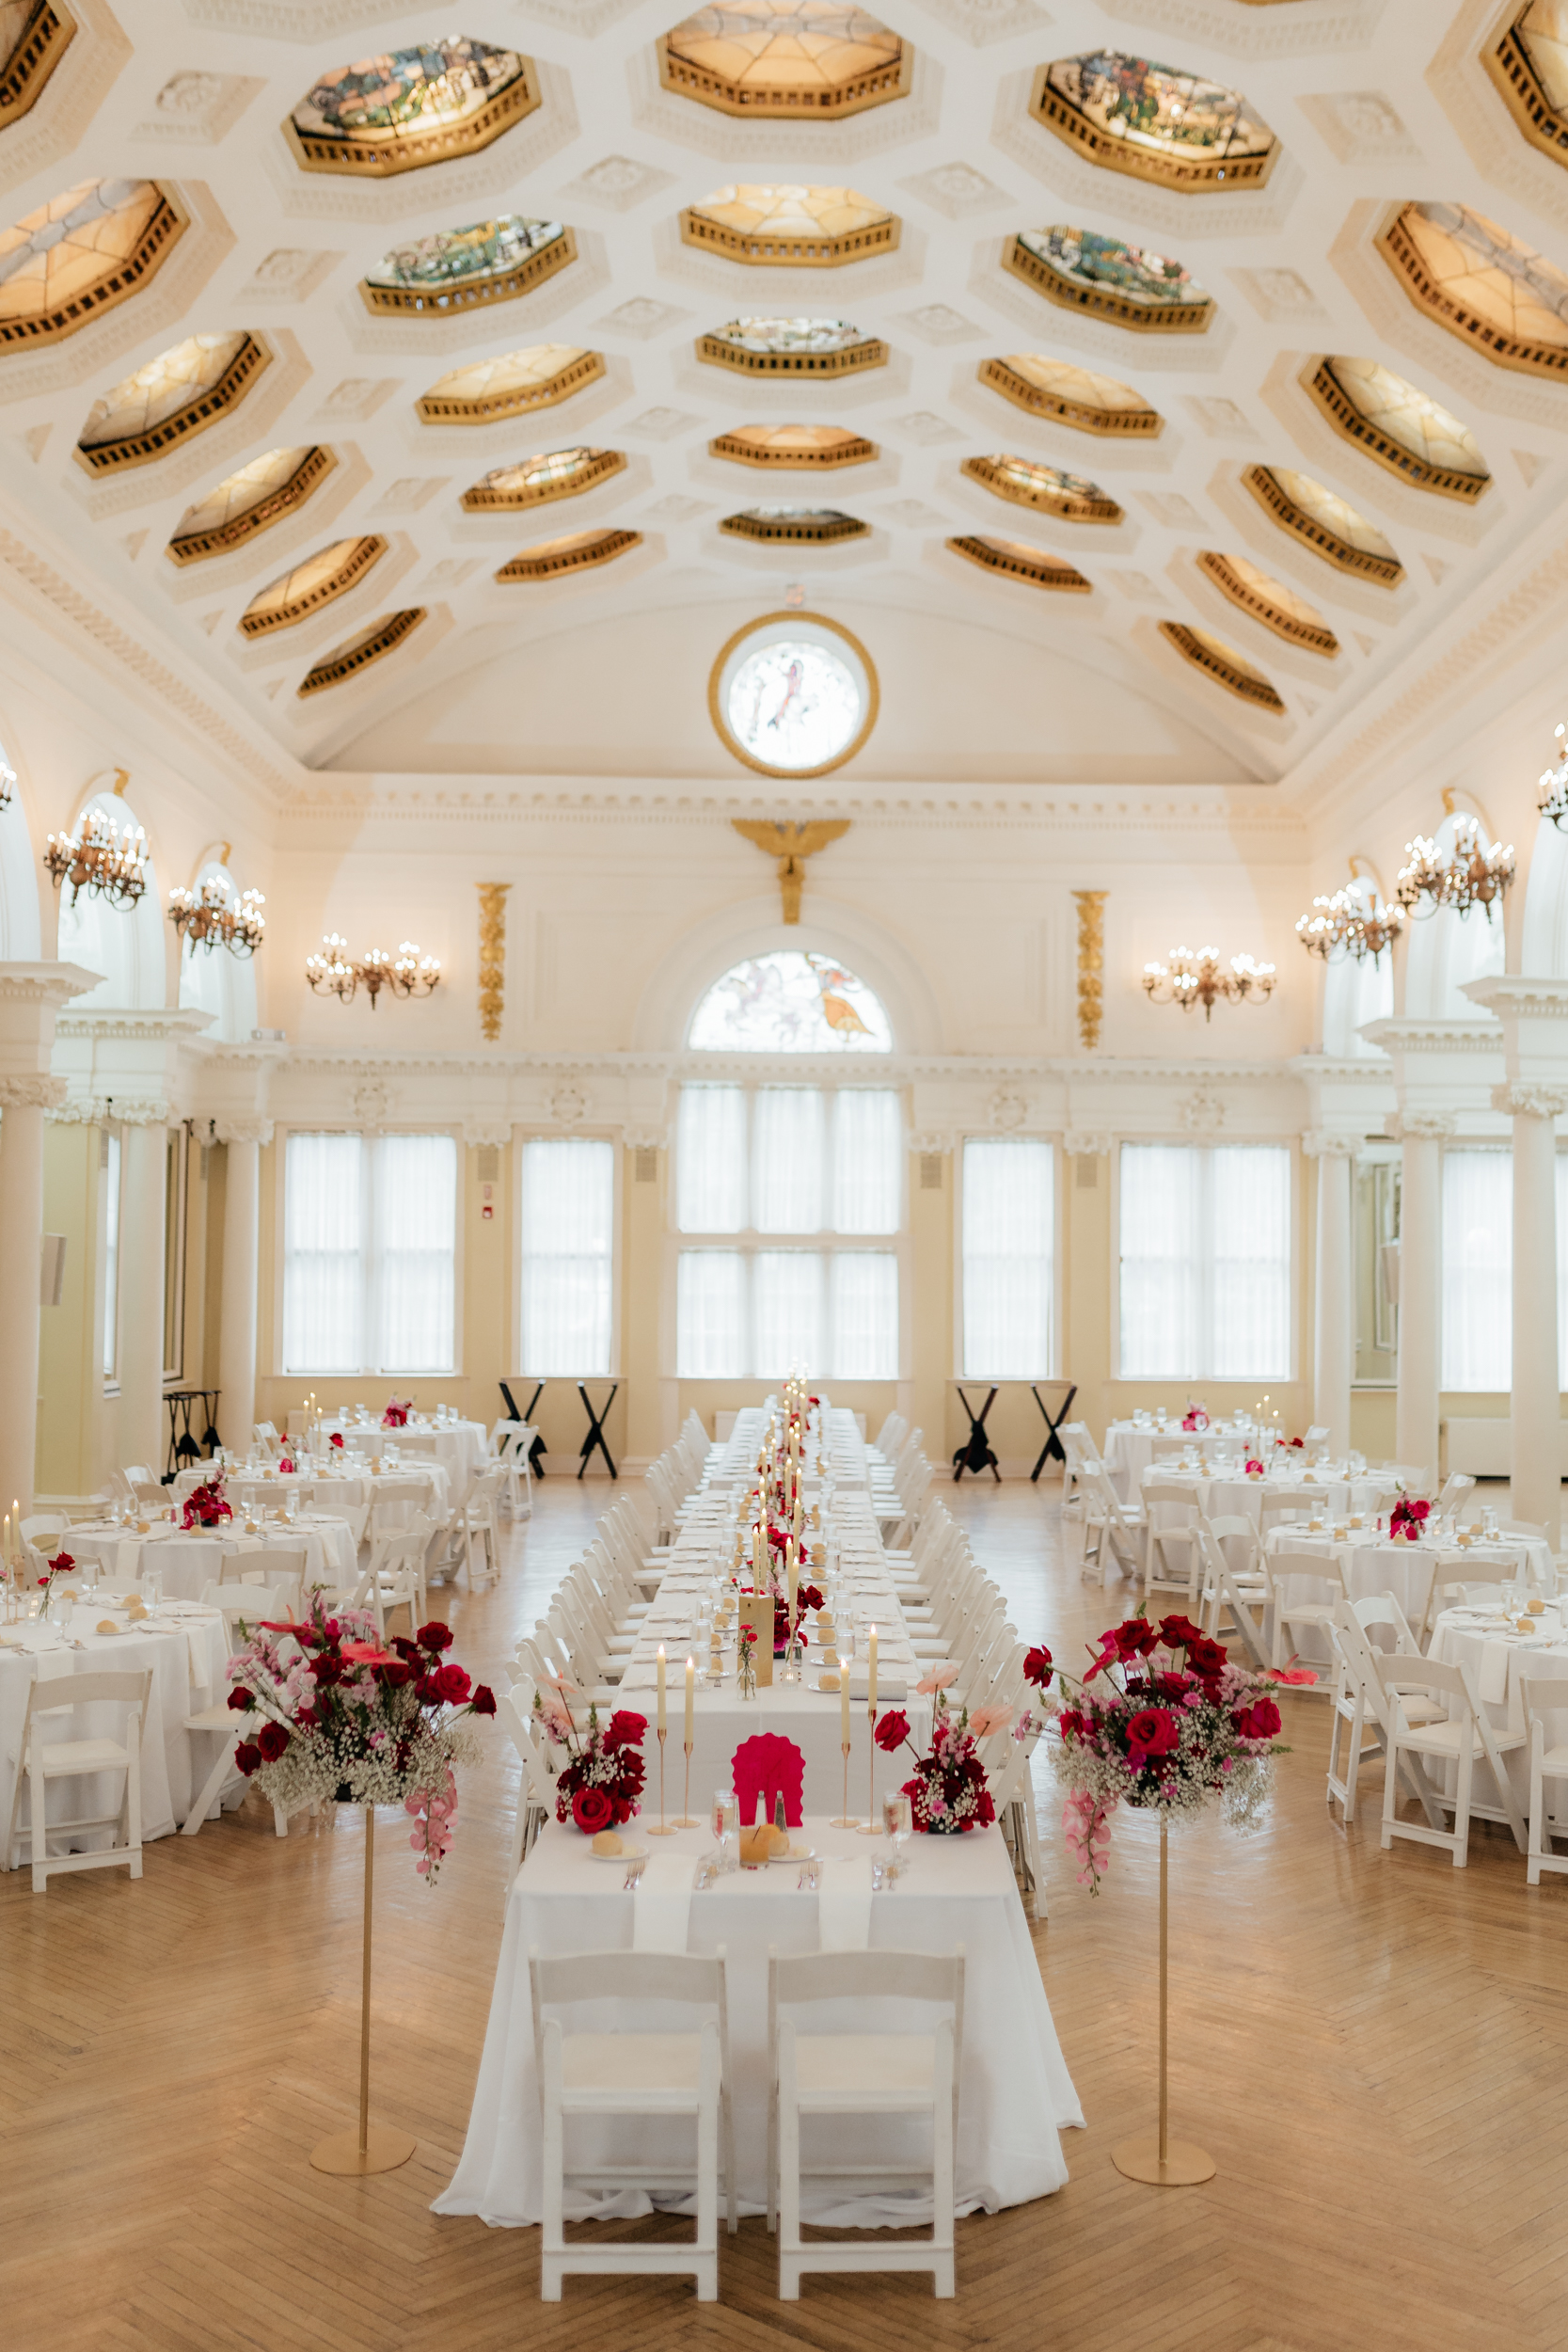 Enchanting and historical Canfield Casino venue in Albany, New York